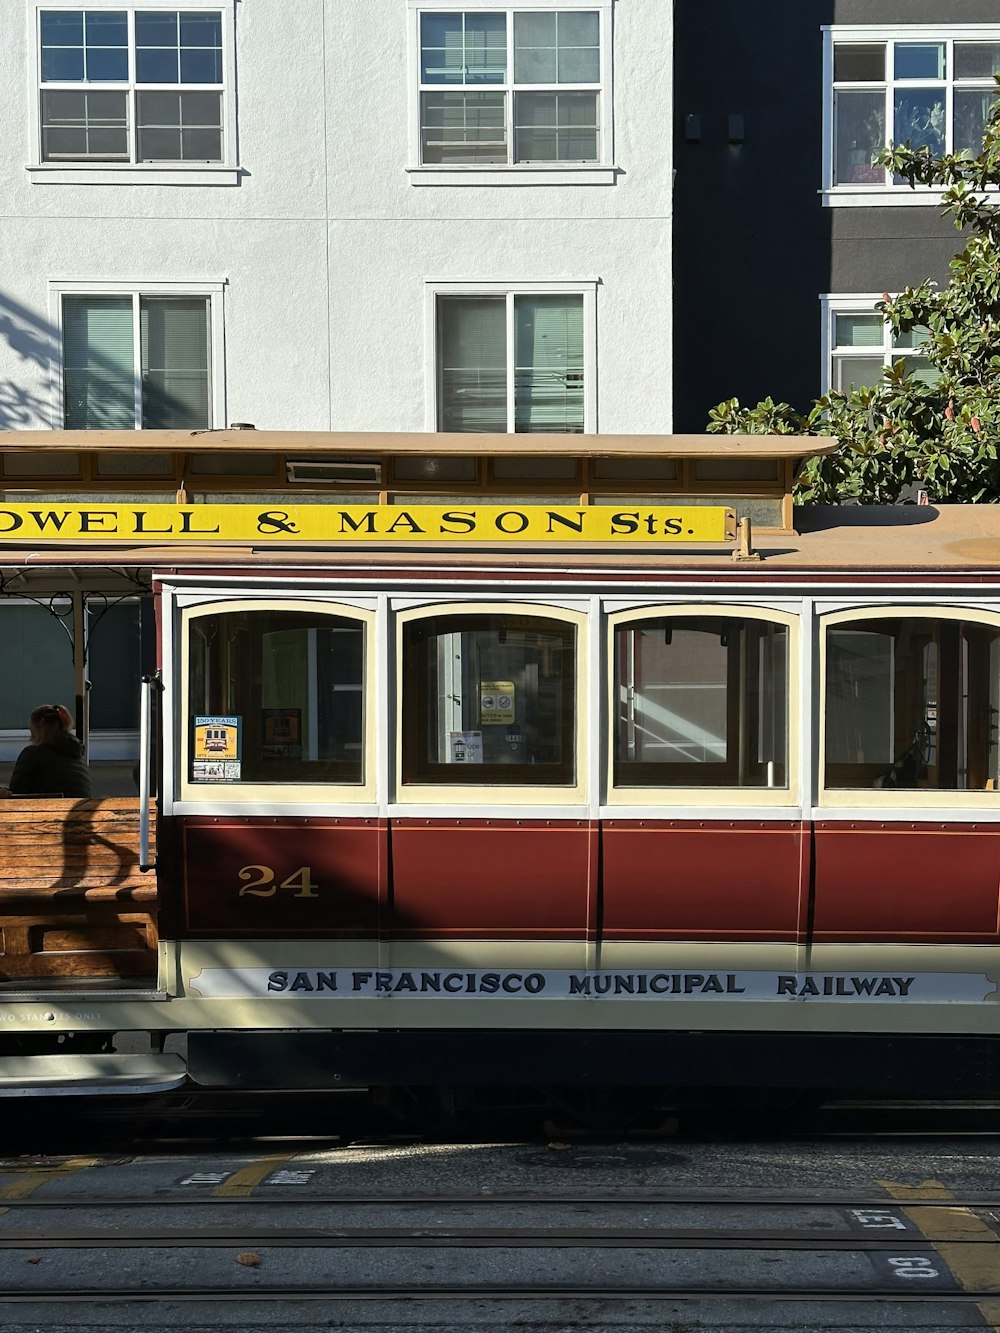 a trolley car on a city street with buildings in the background